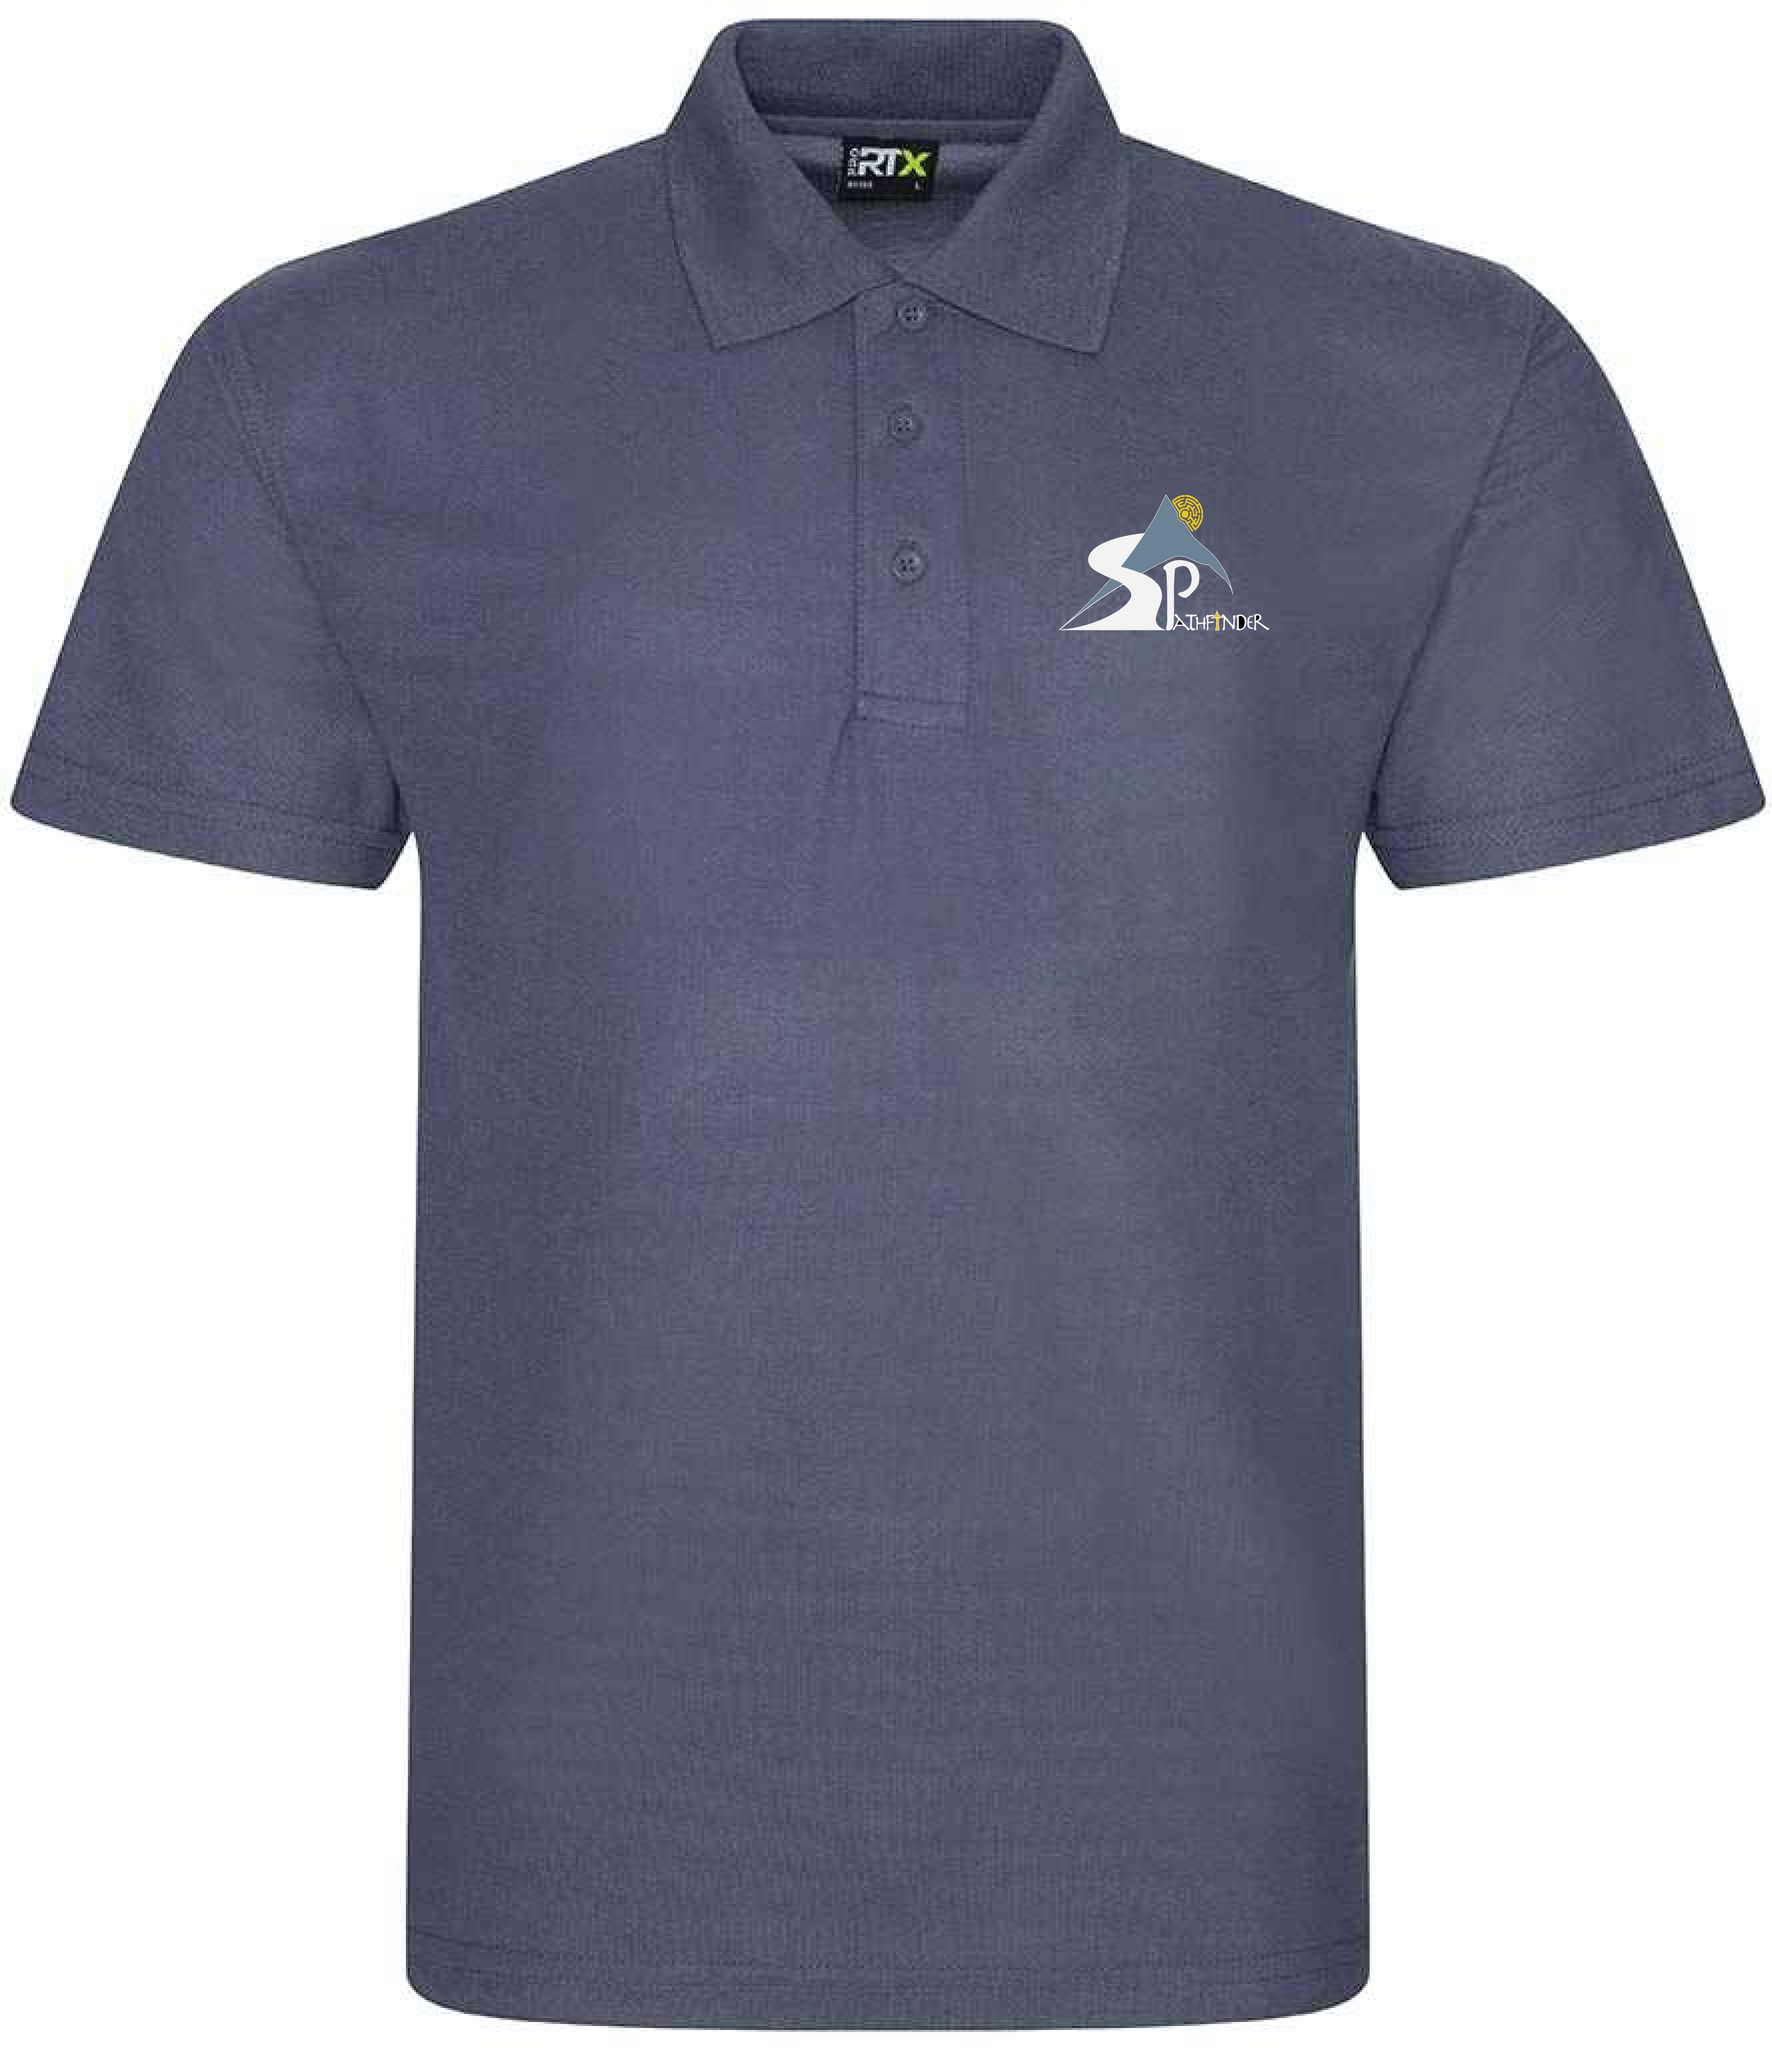 Pathfinder Polo - Embroidered Logo